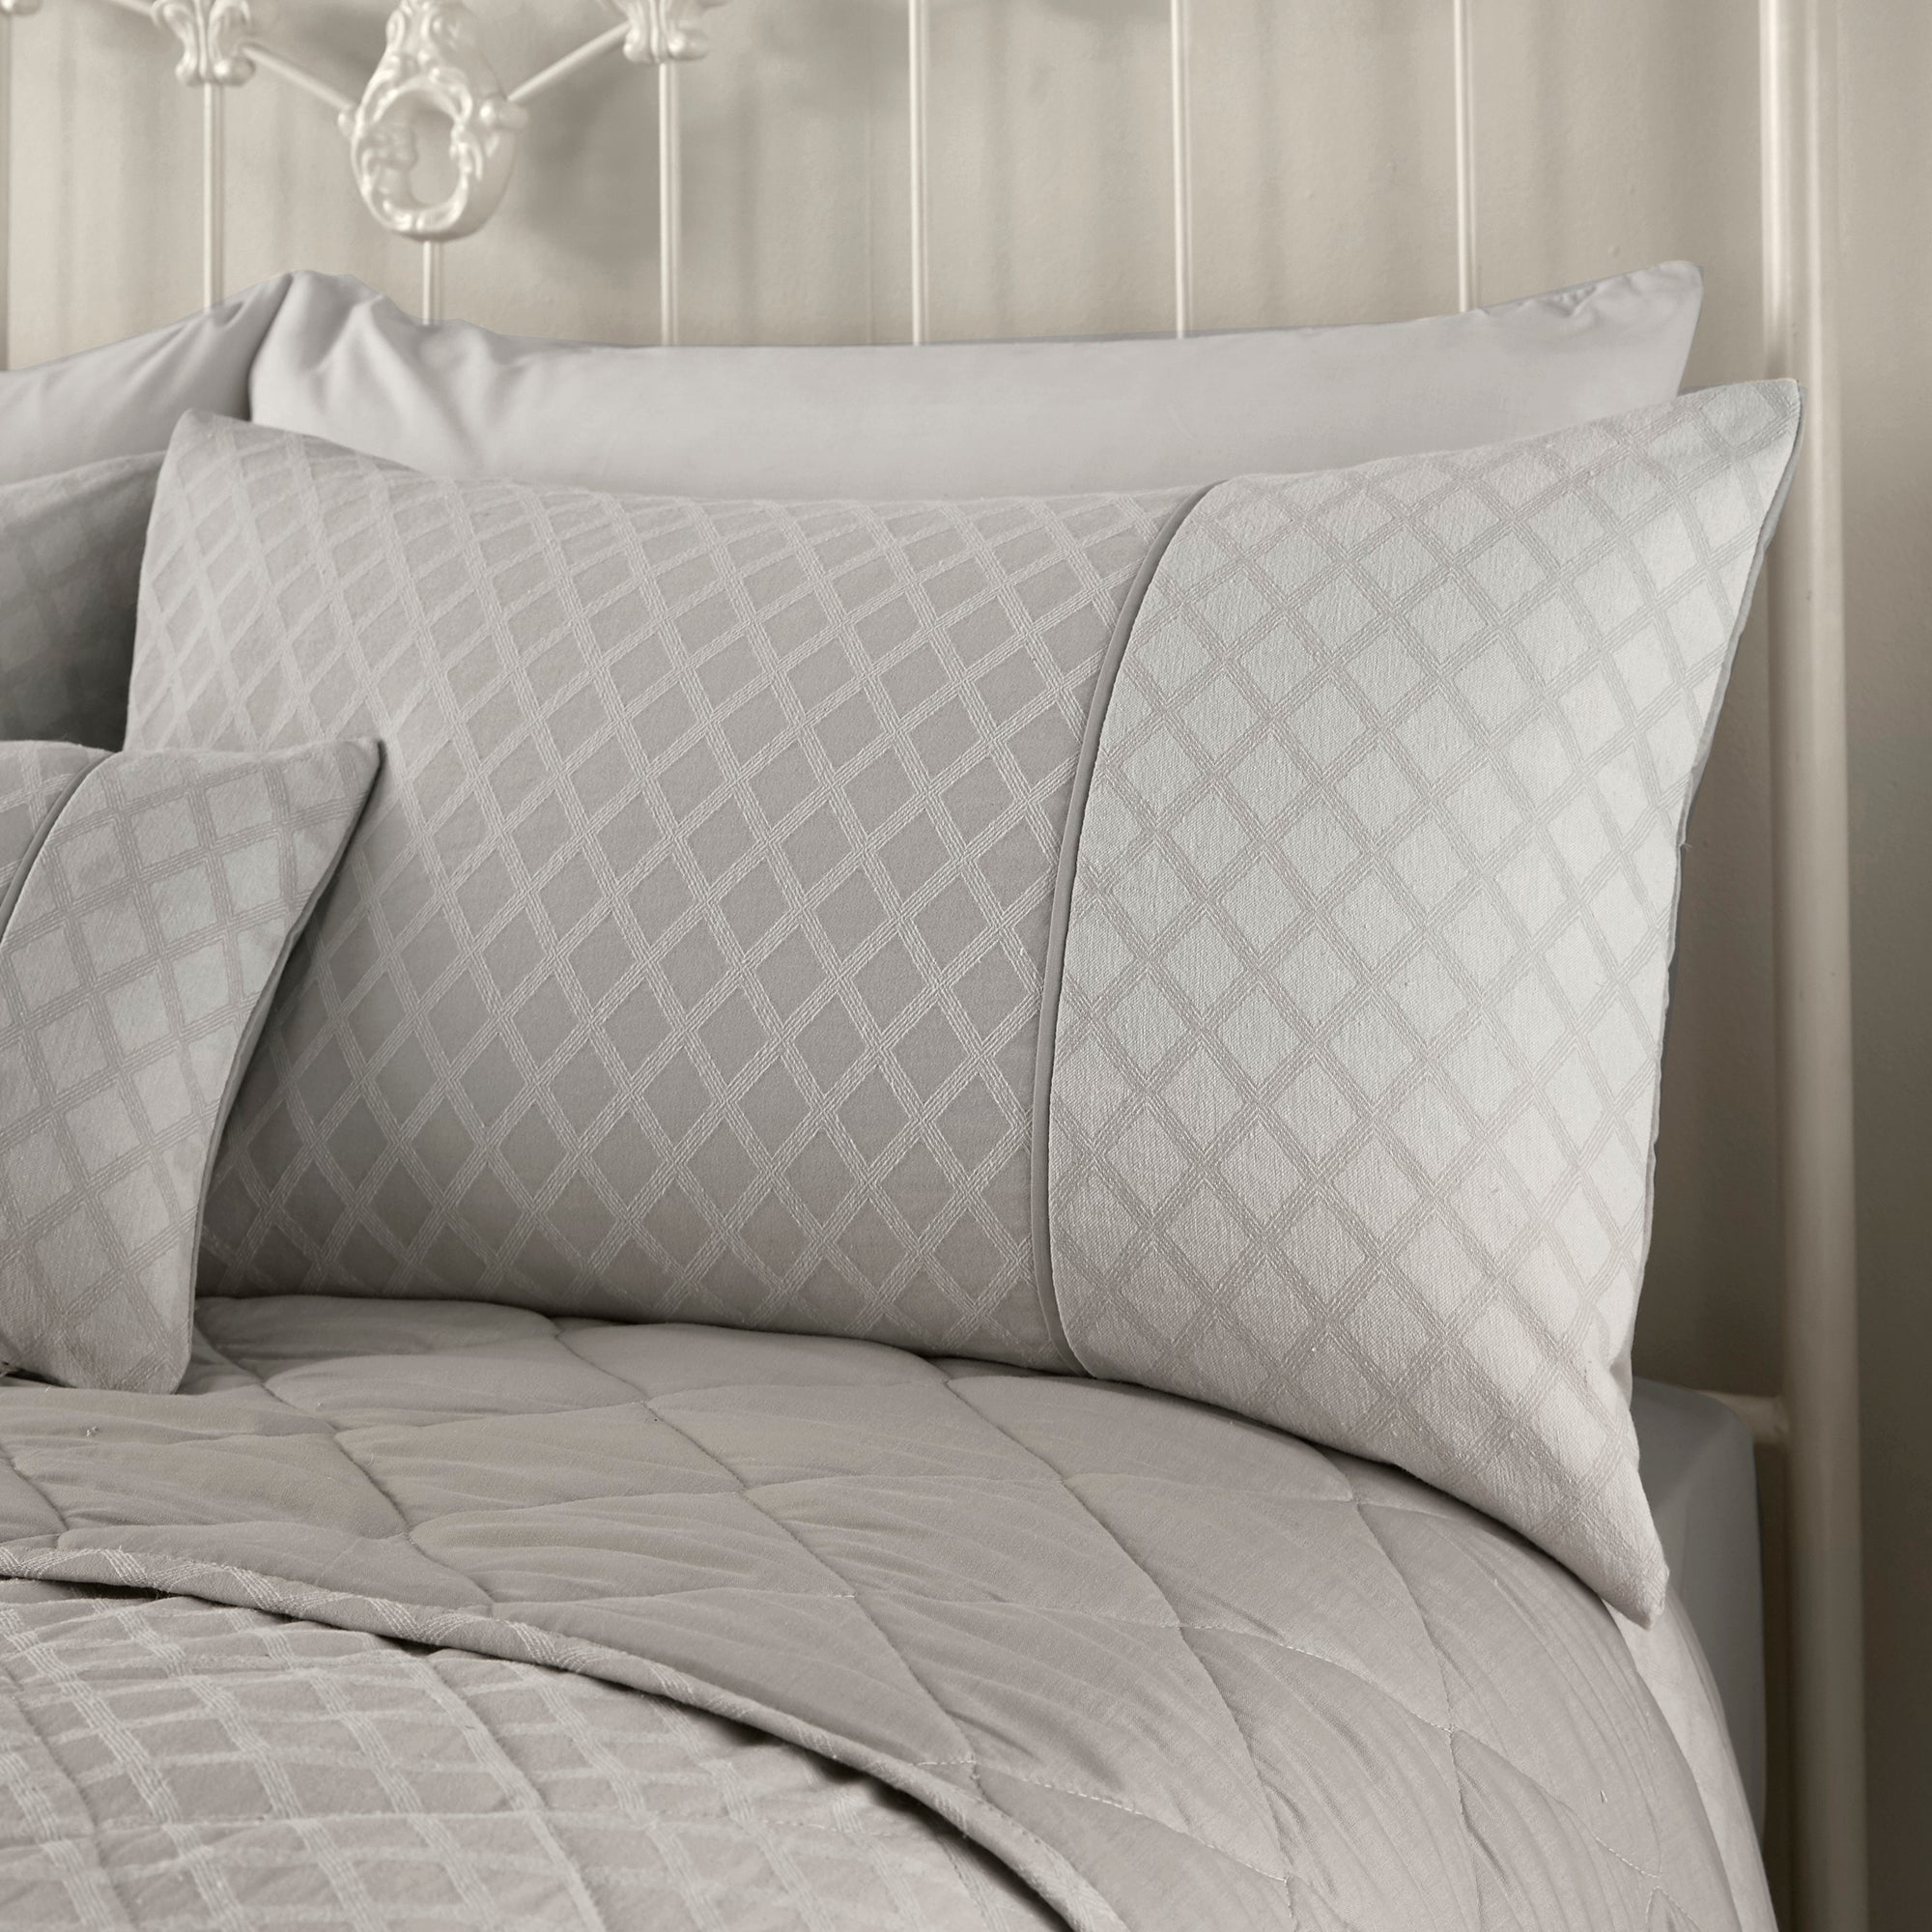 Croma - Jacquard Duvet Cover Set, Bedspread & Curtains in Silver - by D&D Woven